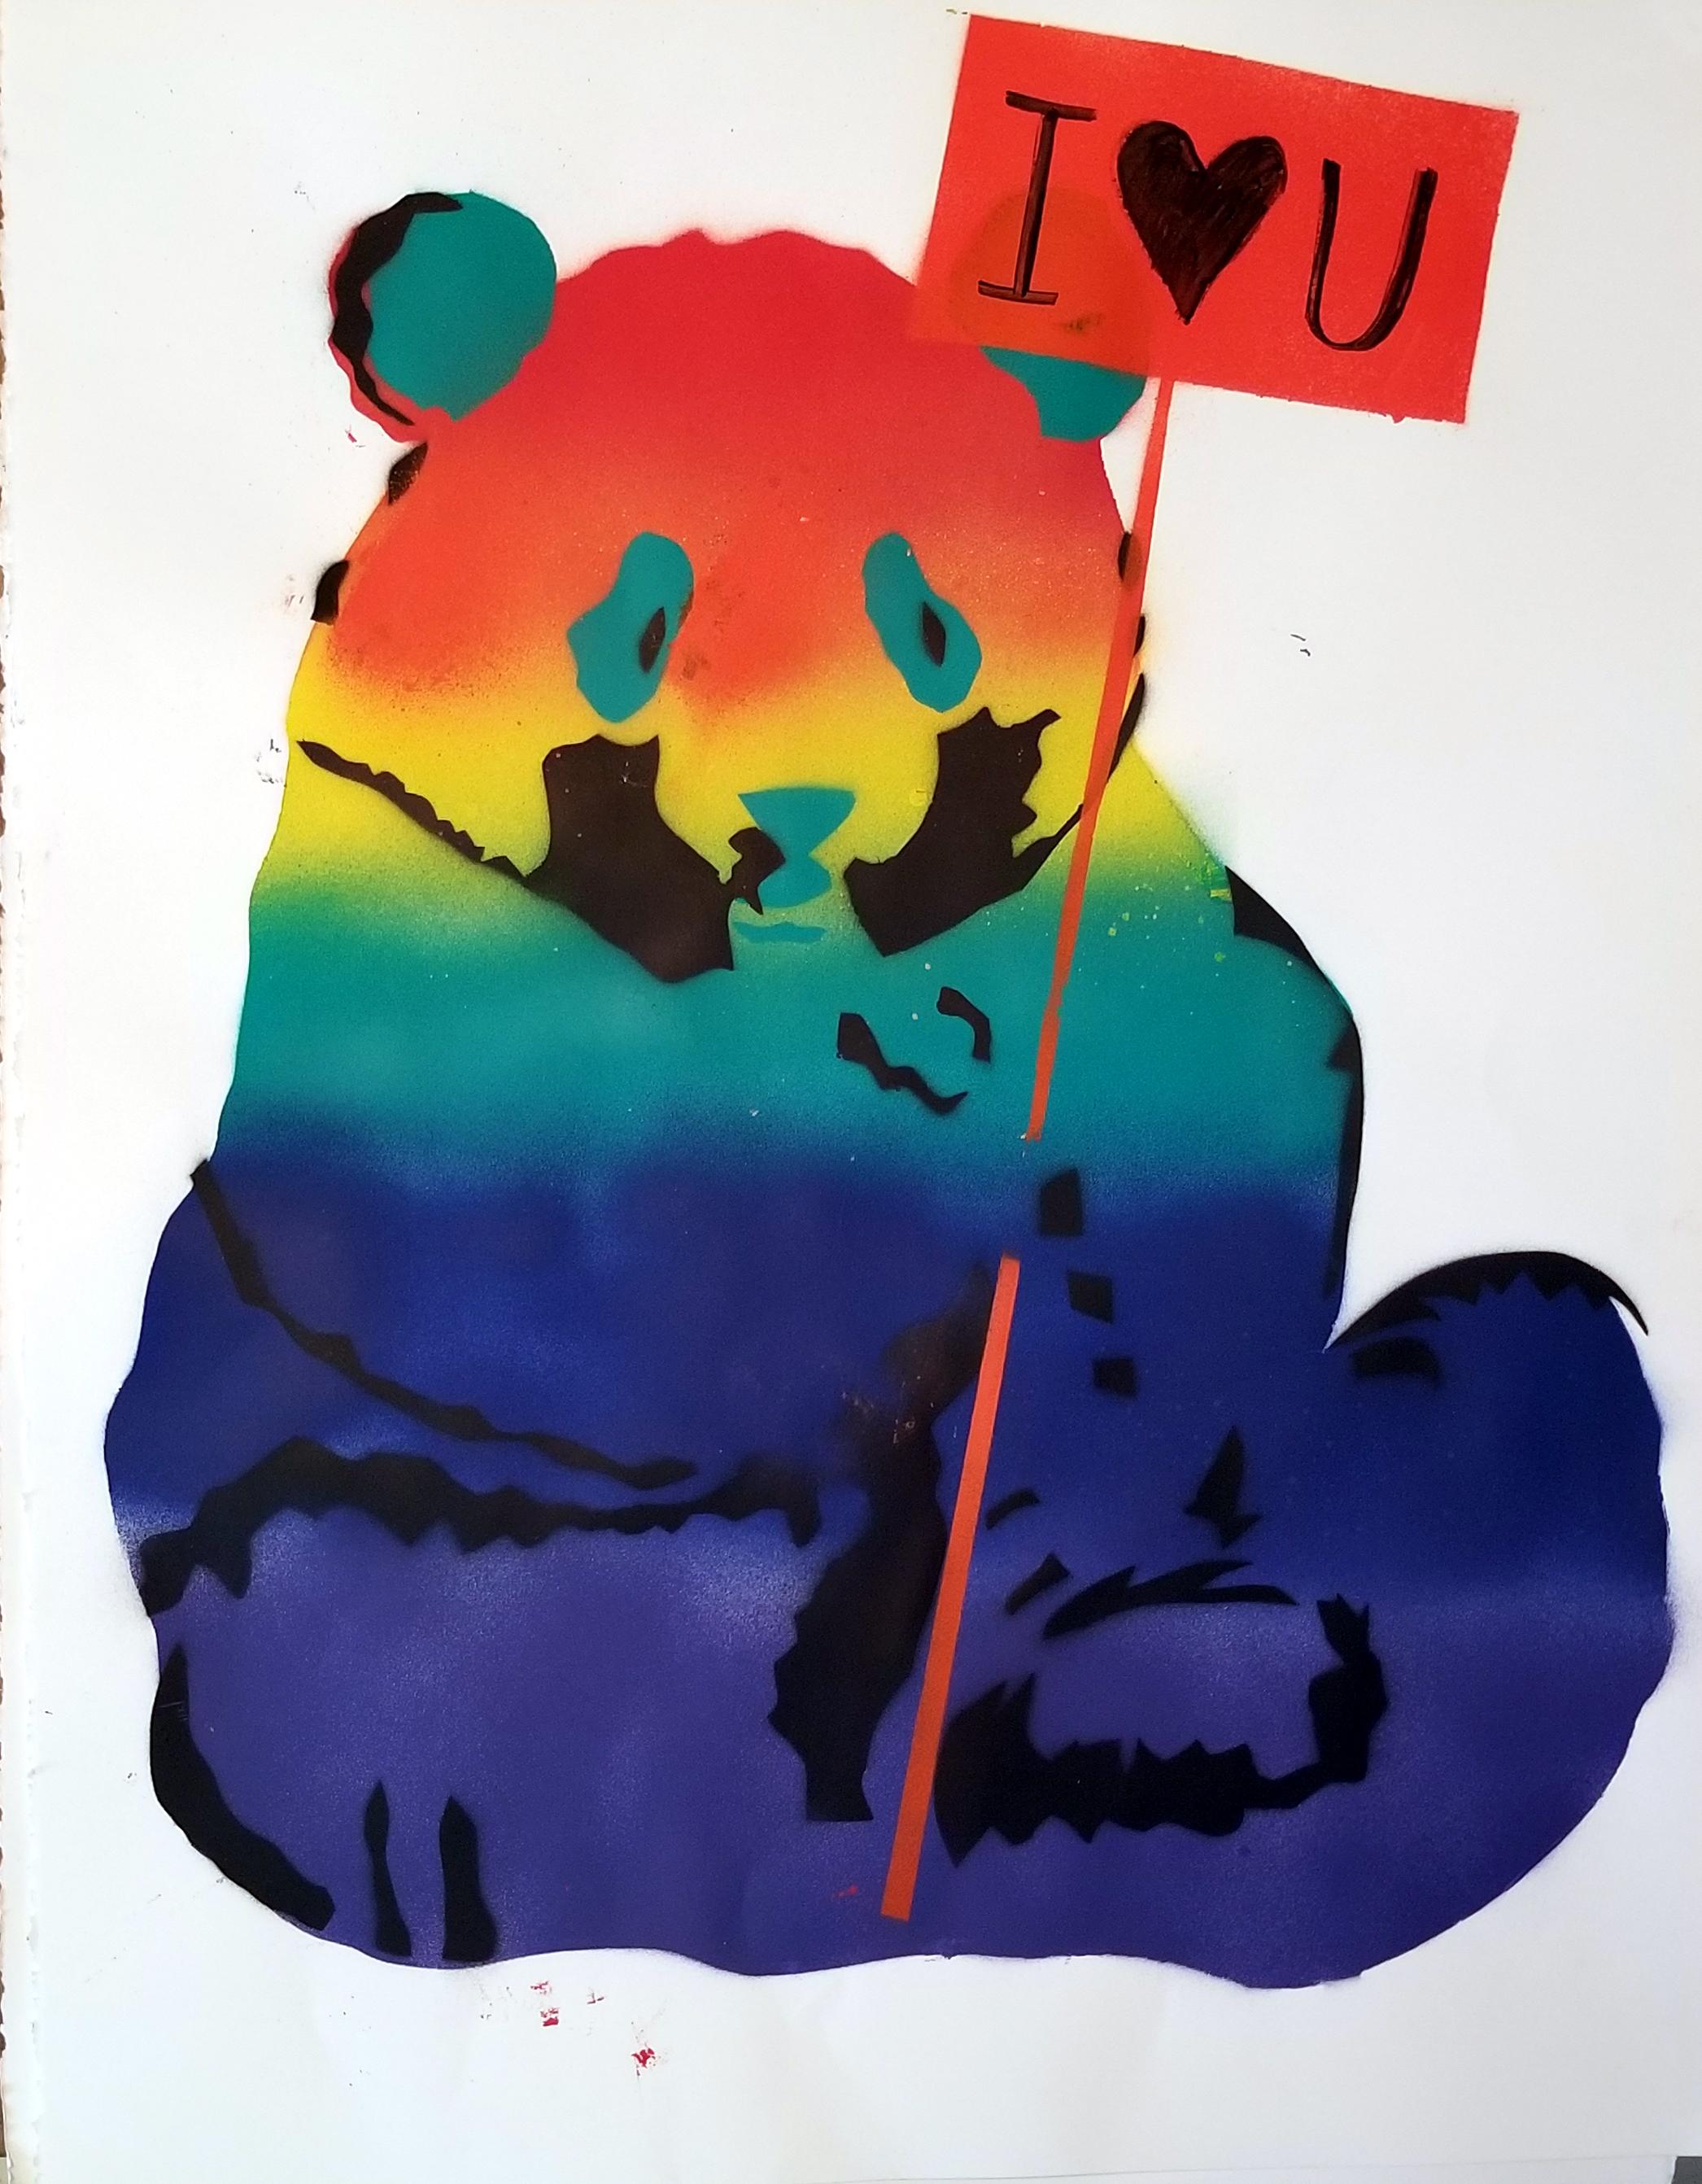 5 layer stencil painting ( Pink, Silver, Red, Black )
Panda Bear holding a PROUD BEAR sign
Political statements in text
These are NOT prints. Original works on paper,

Comes rolled in a tube
Unique pieces
This is on 90lb Paper color: Natural

New